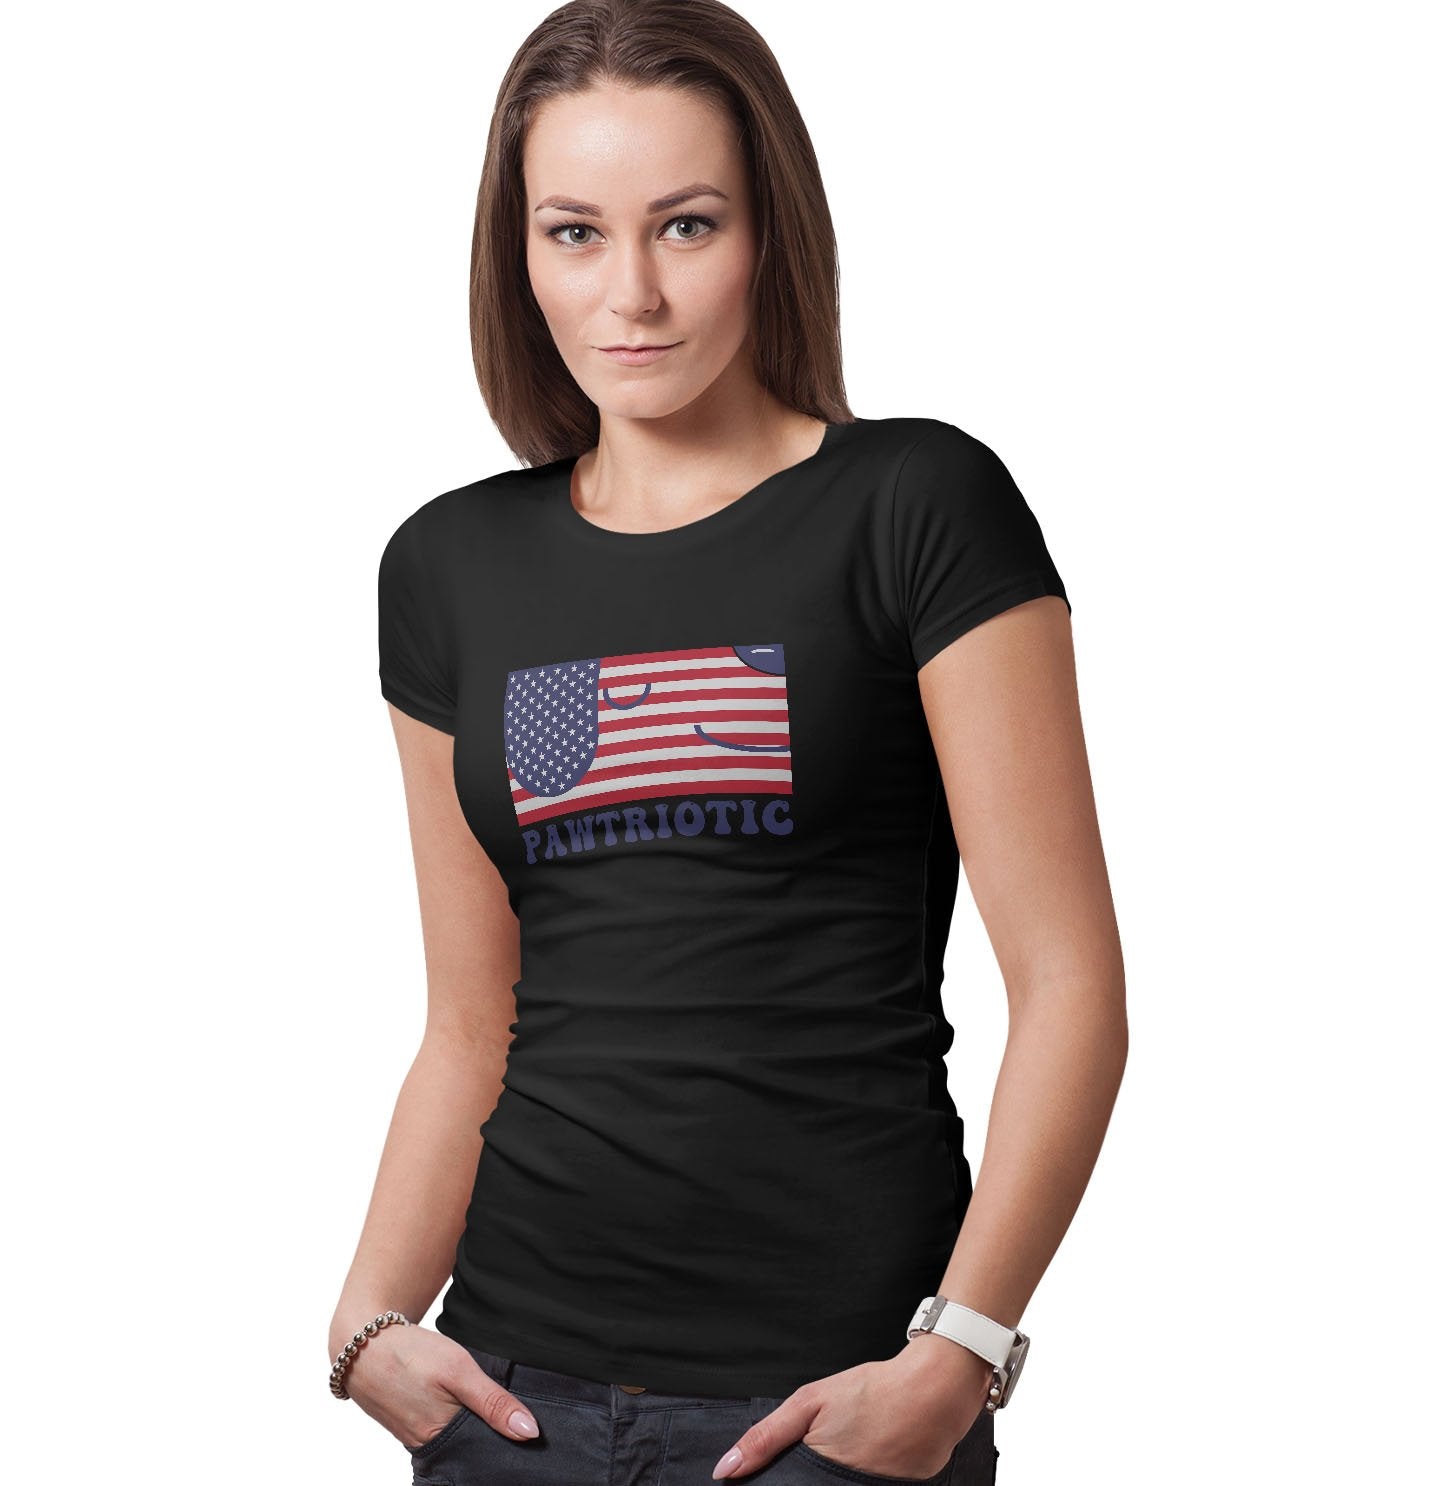 Pawtriotic Flag Dog - Women's Fitted T-Shirt